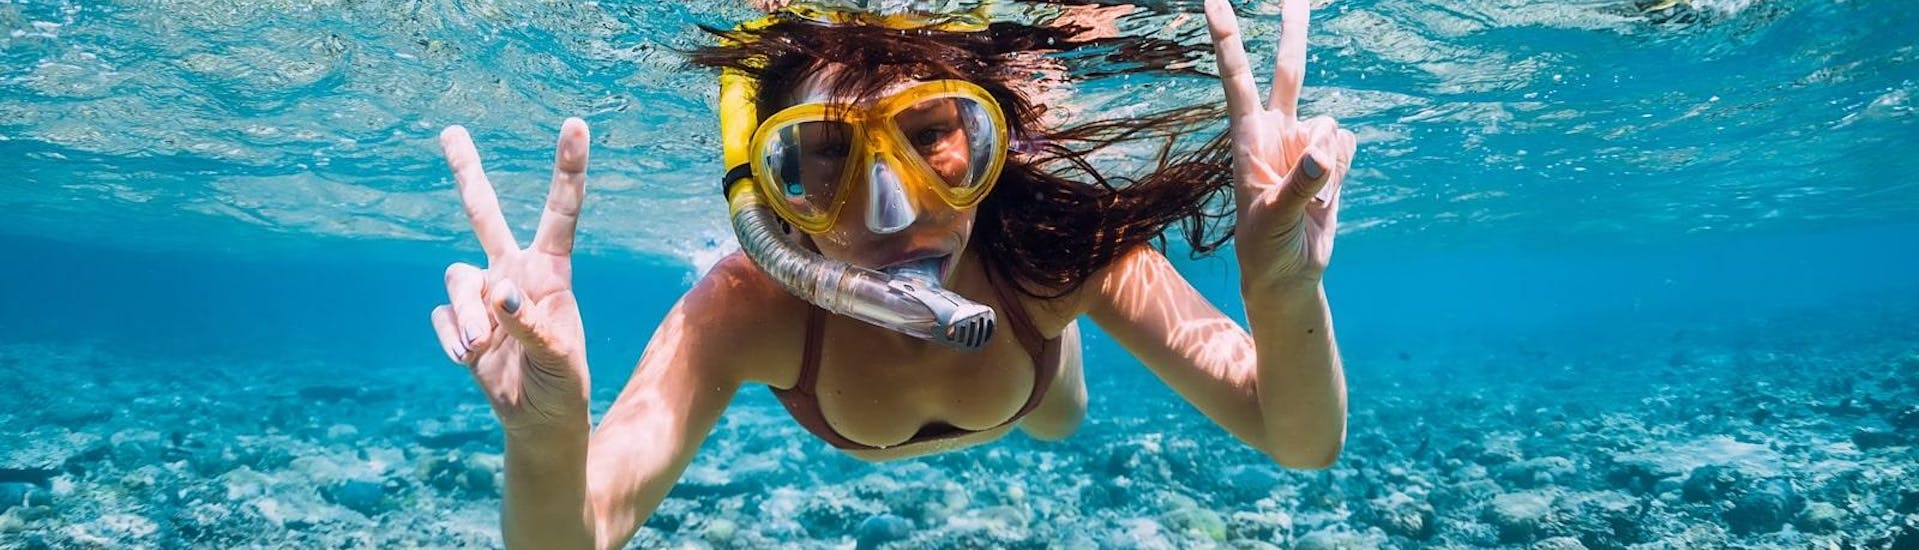 A girl is enjoying the Snorkeling on the Gold Coast - Wave Break Island organised by Gold Coast Dive Centre.